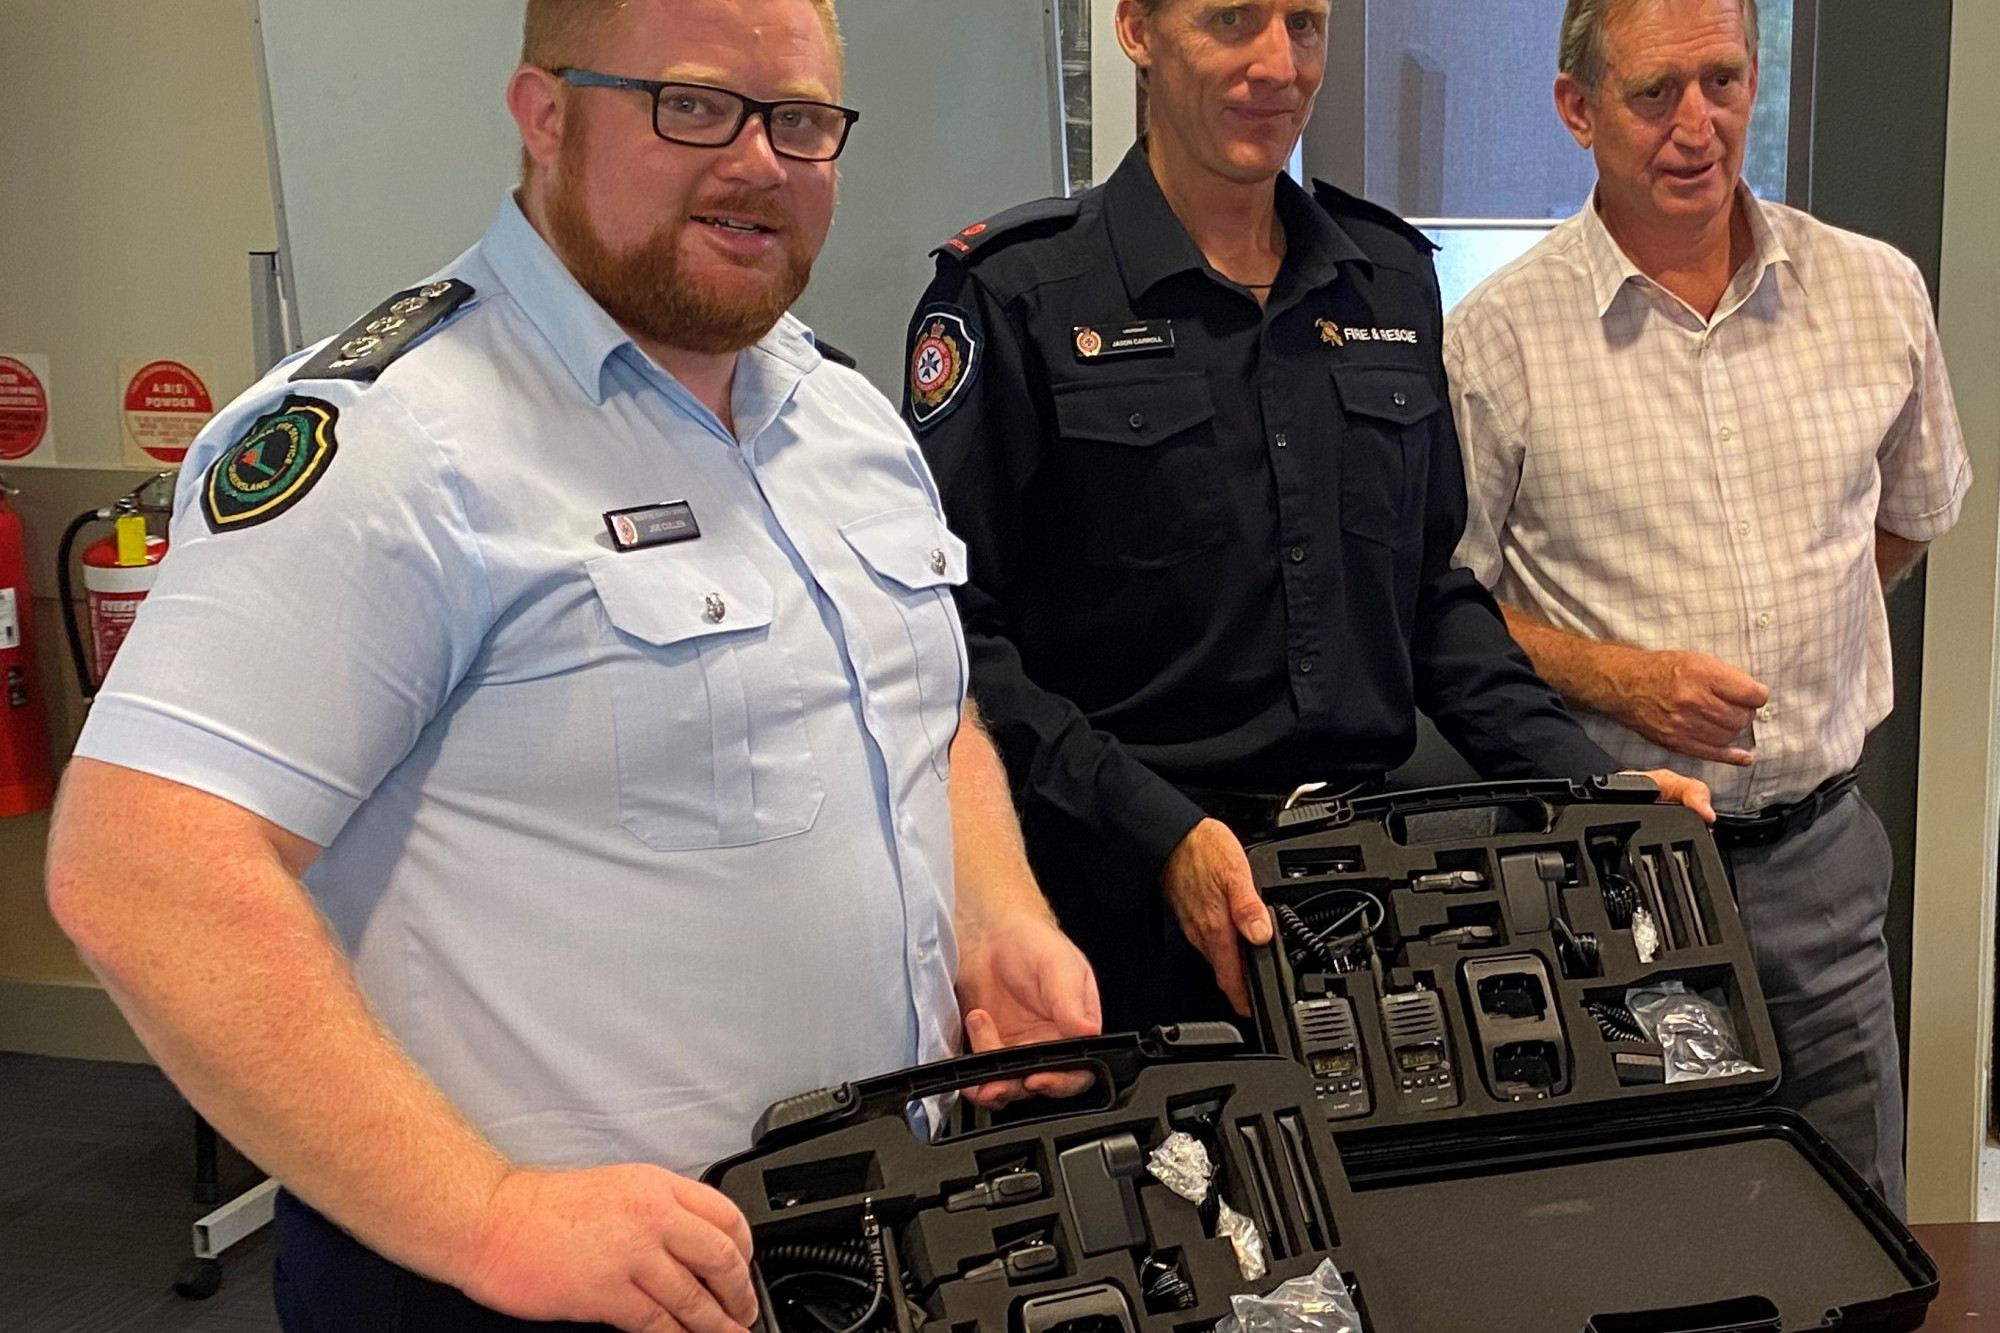 PICTURED: Joe Cullen, Acting Inspector, Area Director of Cairns Peninsular Area Rural Fire Service, and Jason Carroll Captain of the Cooktown Auxiliary Fire Brigade was presented the new radios by Cook Shire Mayor Peter Scott last week.